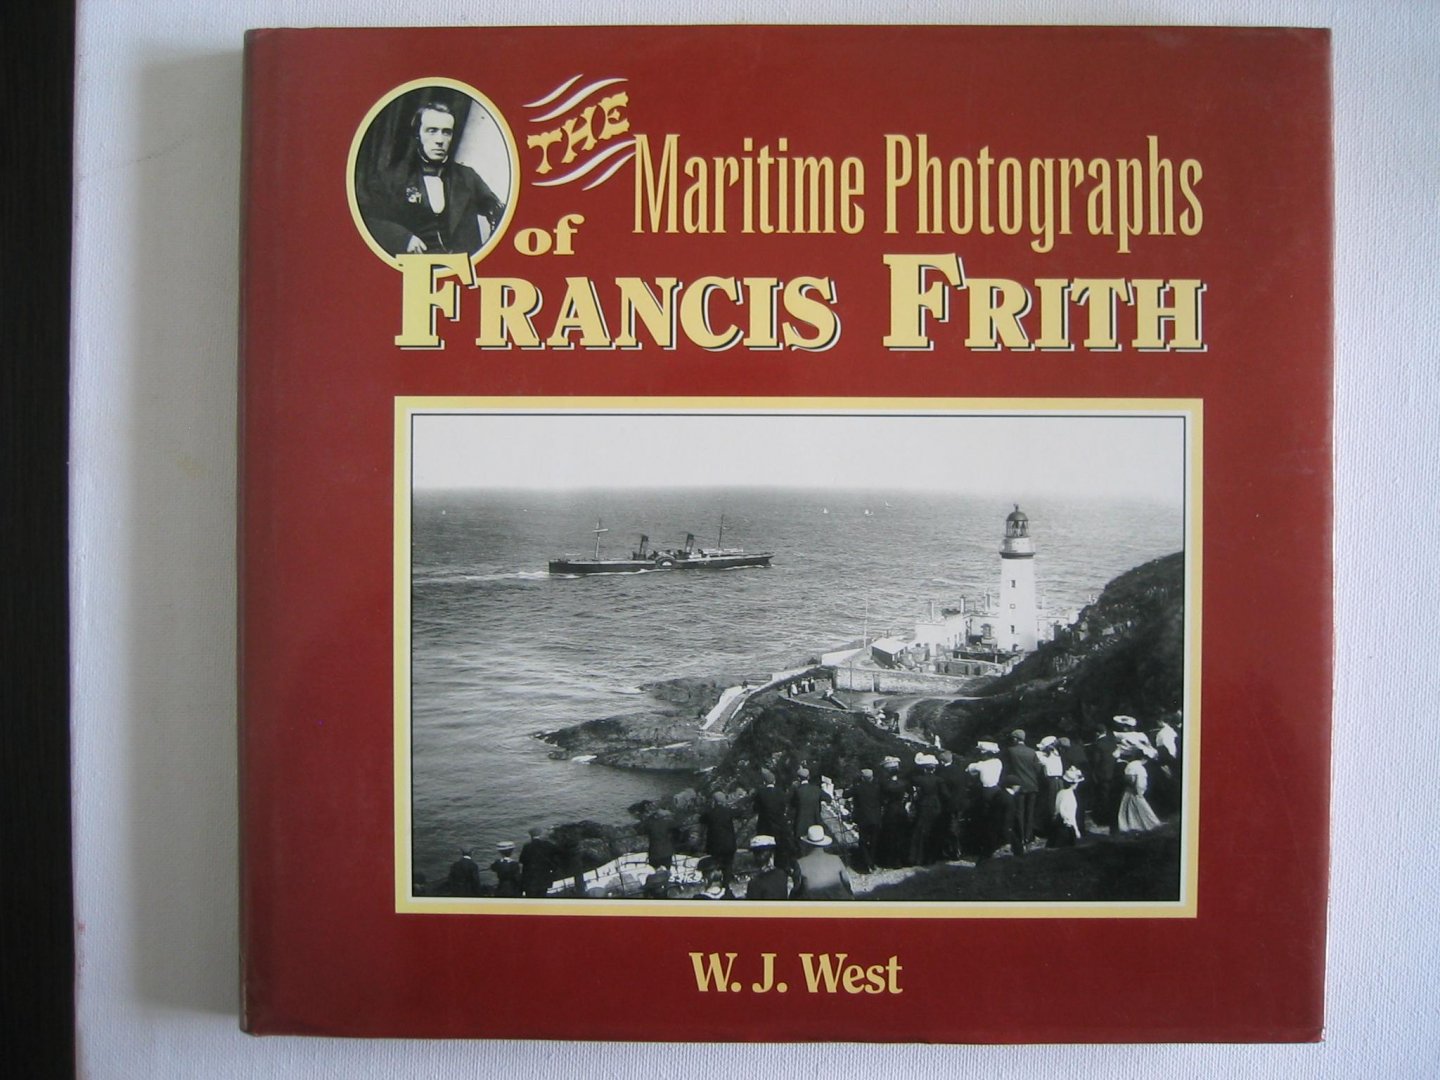 West, W.J. - The Maritime photographs of Francis Frith